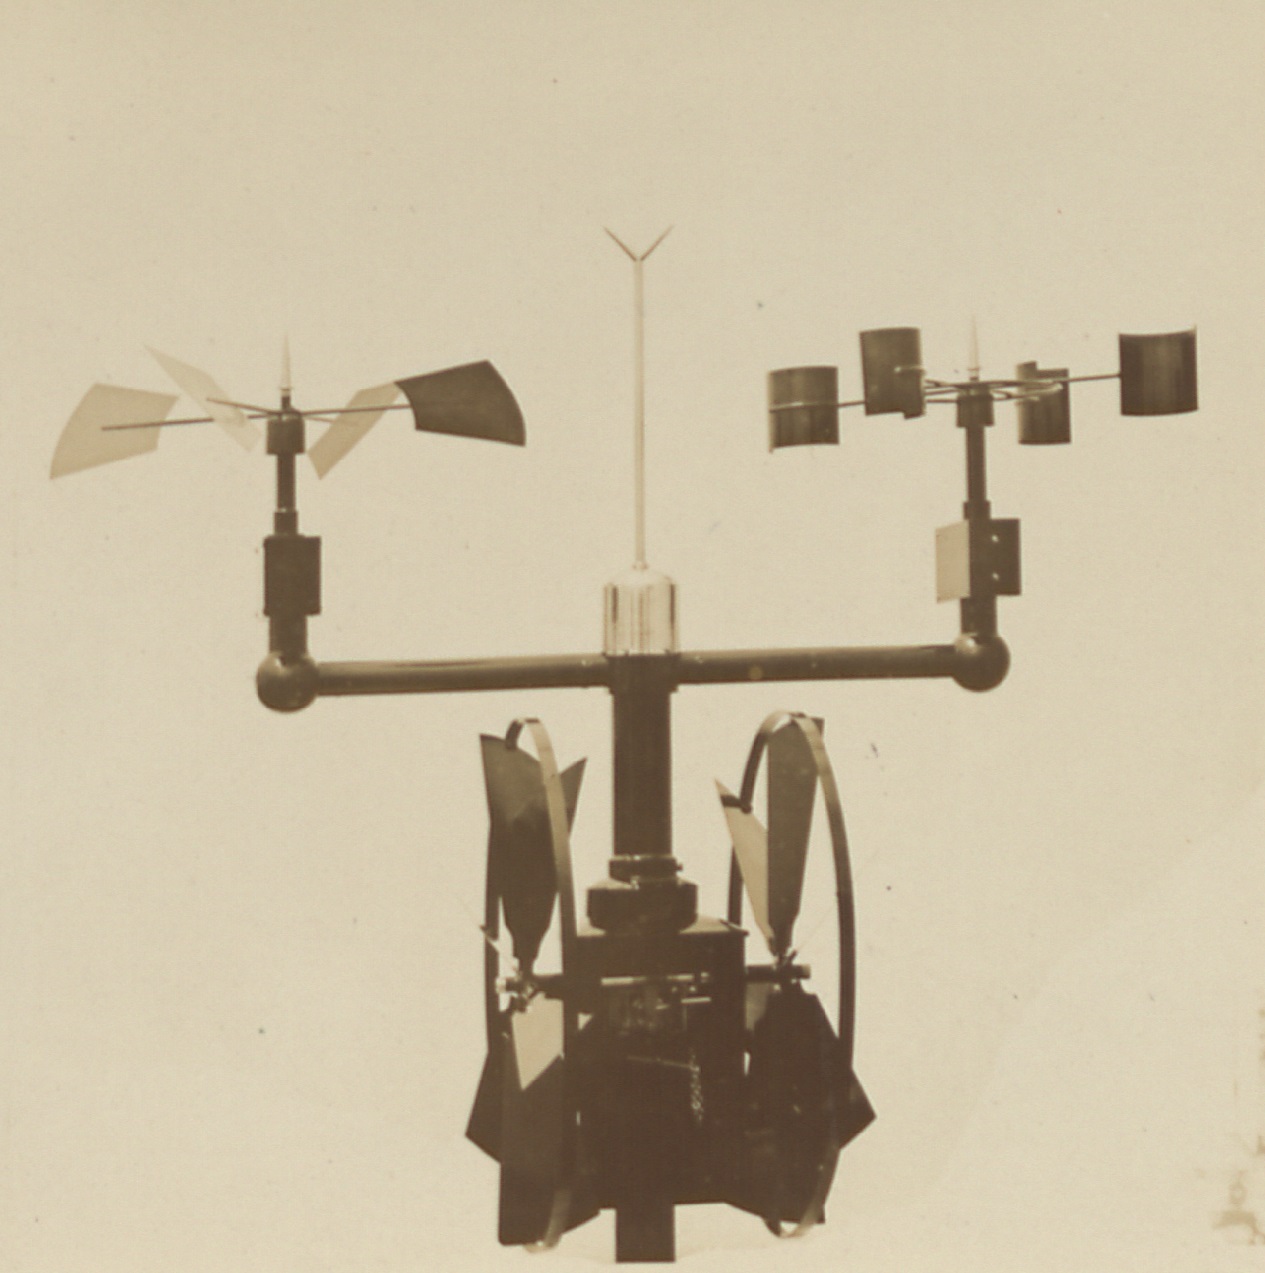 Image_of_a_purpose_built_anemometer_created_by_Dechevrens_placed_at_the_top_of_the_observation_tower_Jersey_Heritage.jpg